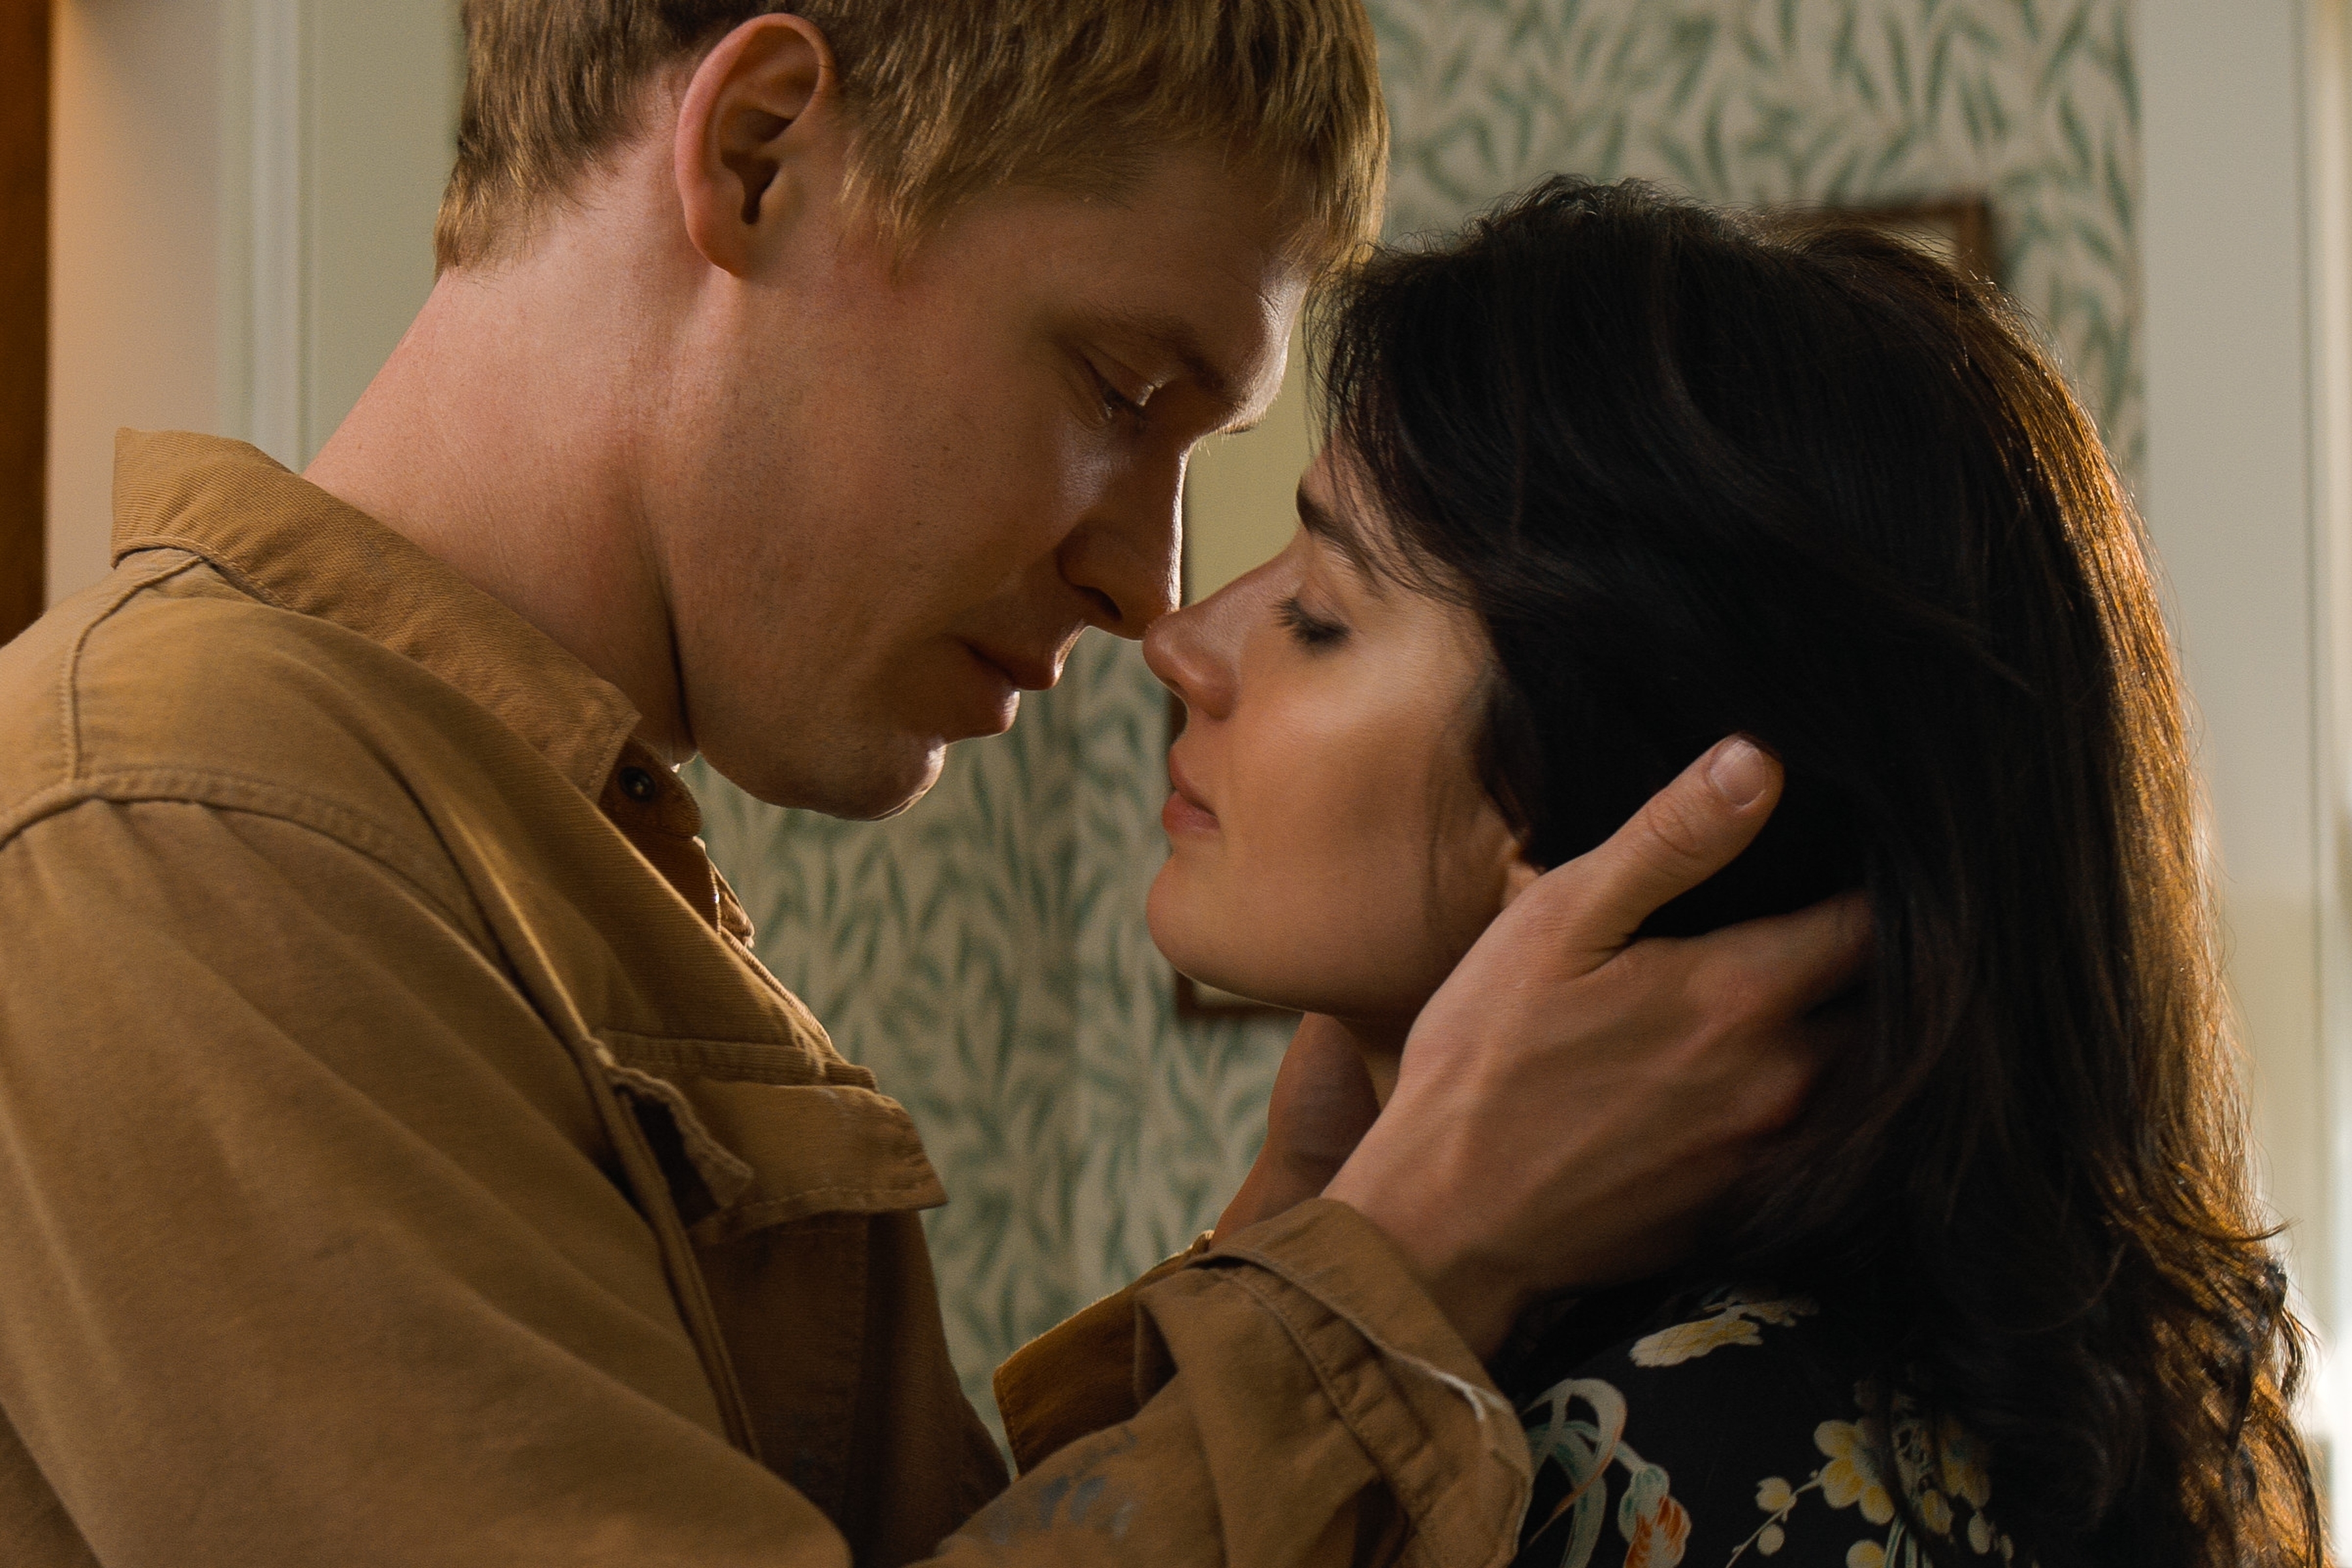 A close-up of Billy Howle and Eve Hewson about to kiss in a tender moment. Joe wears a casual jacket, while Letitia wears a floral-patterned outfit